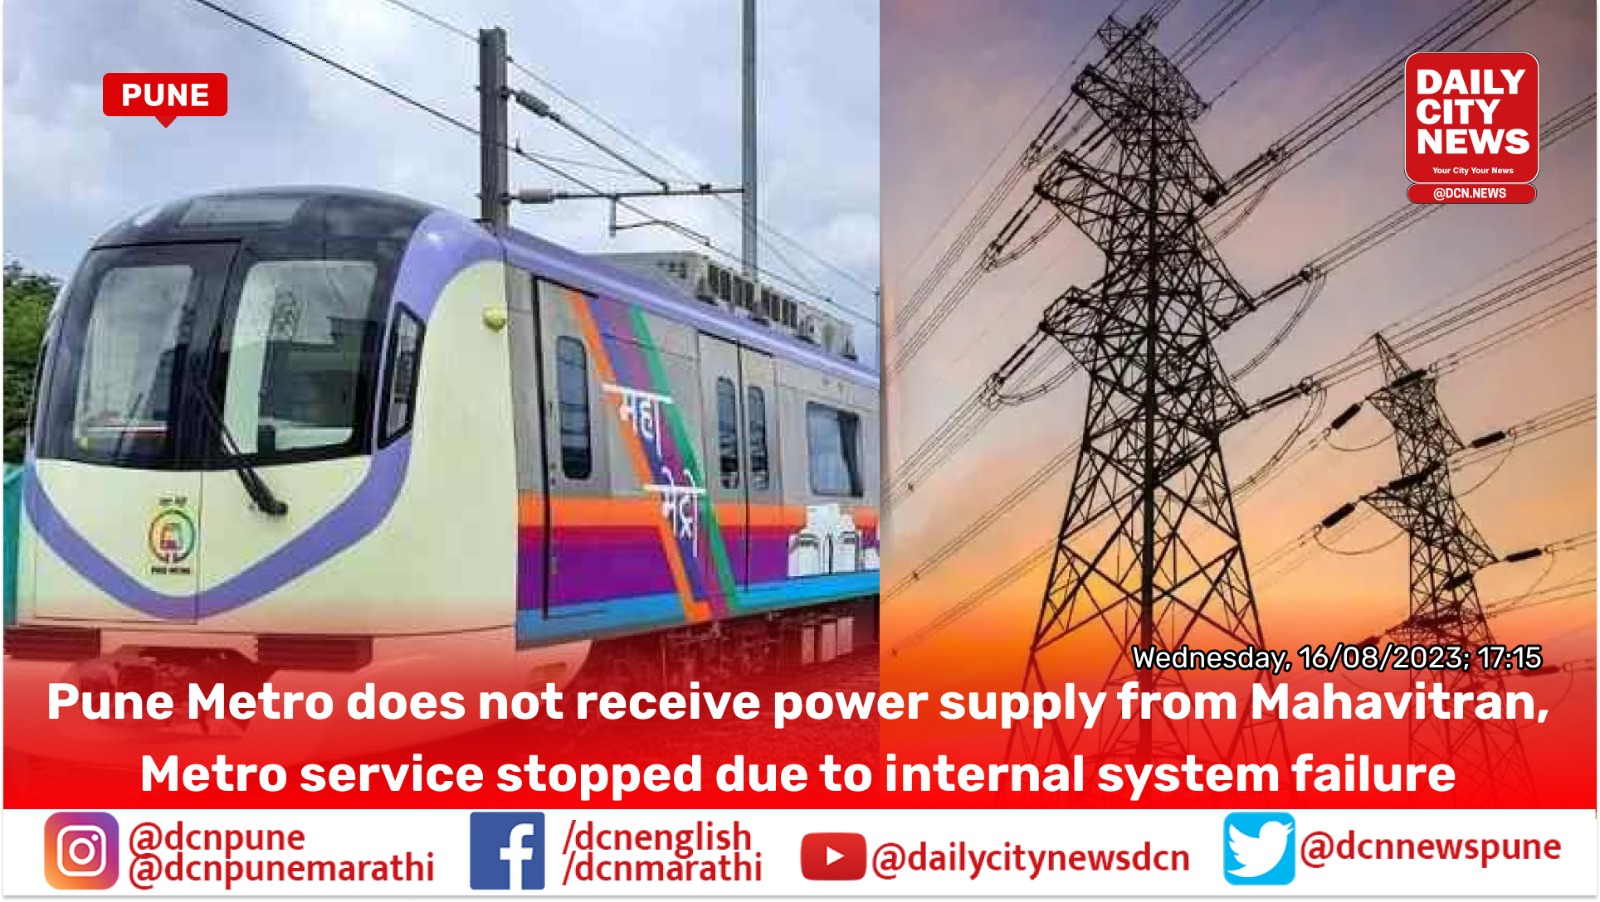 Pune Metro does not receive power supply from Mahavitran, Metro service stopped due to internal system failure